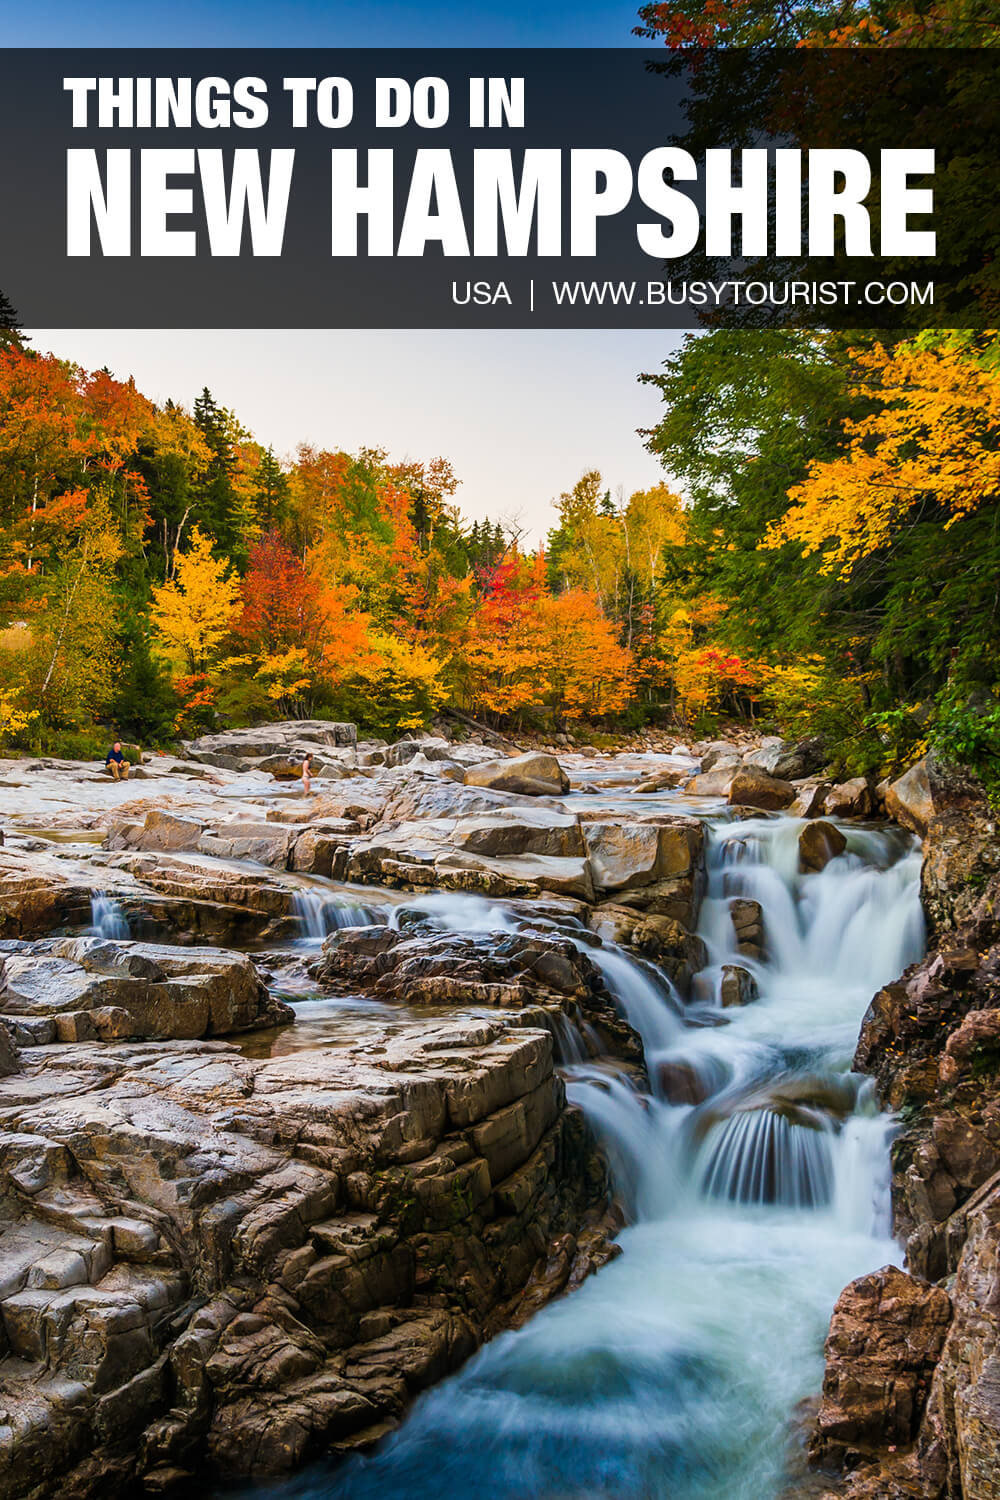 52 Things To Do & Places To Visit In New Hampshire Attractions